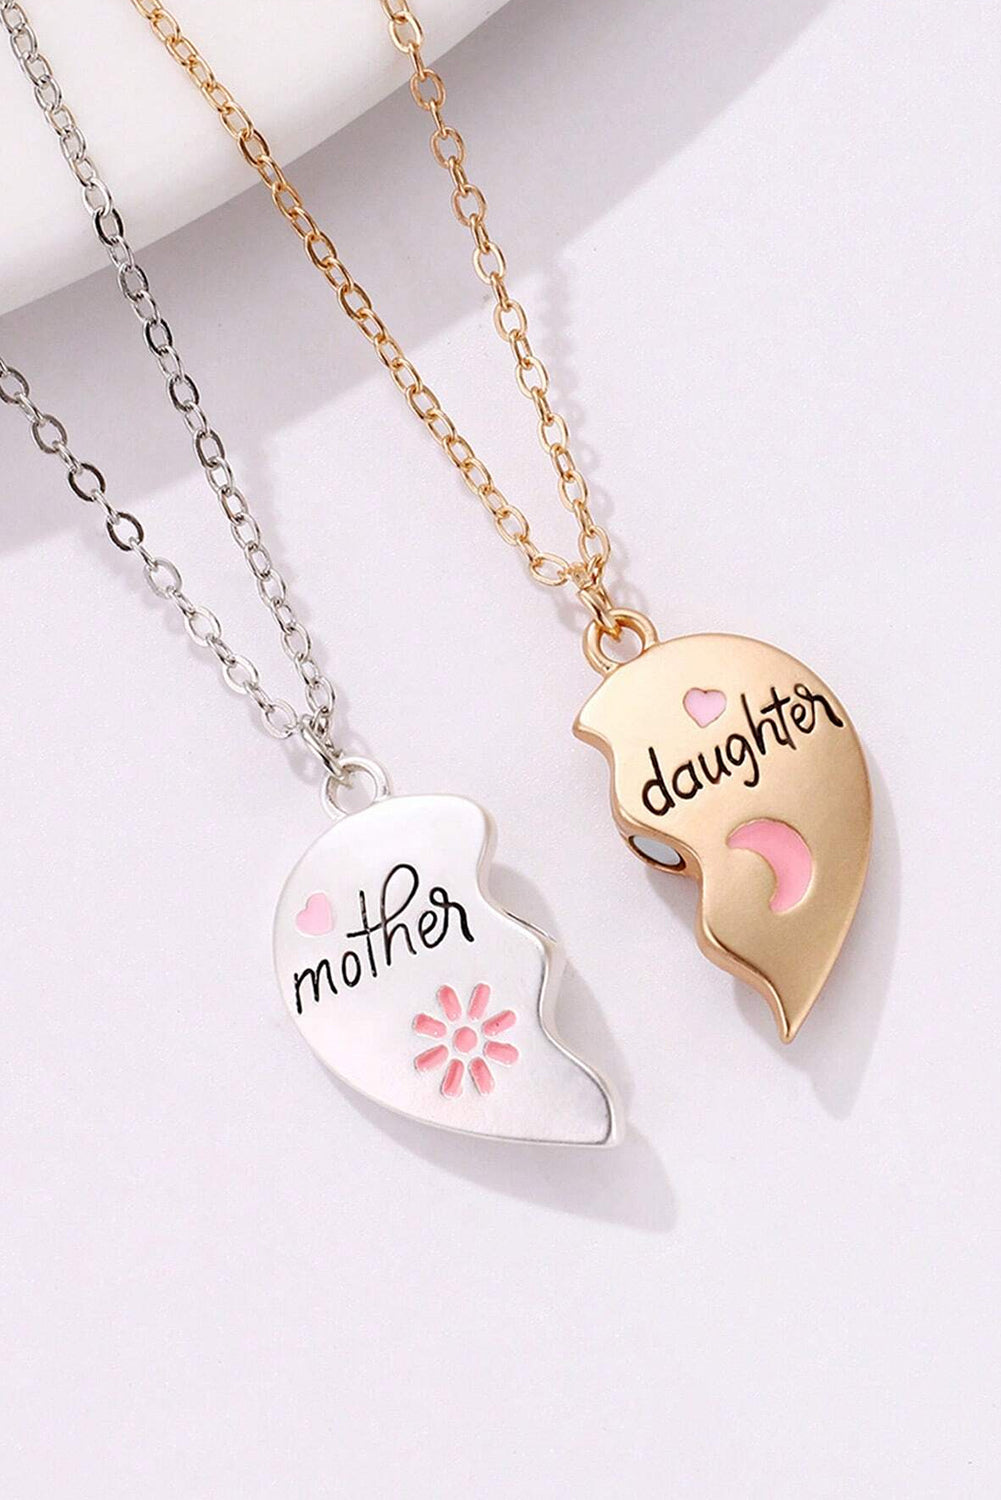 White 2pcs Mother & Daughter Magnetic Heart Necklace Jewelry JT's Designer Fashion